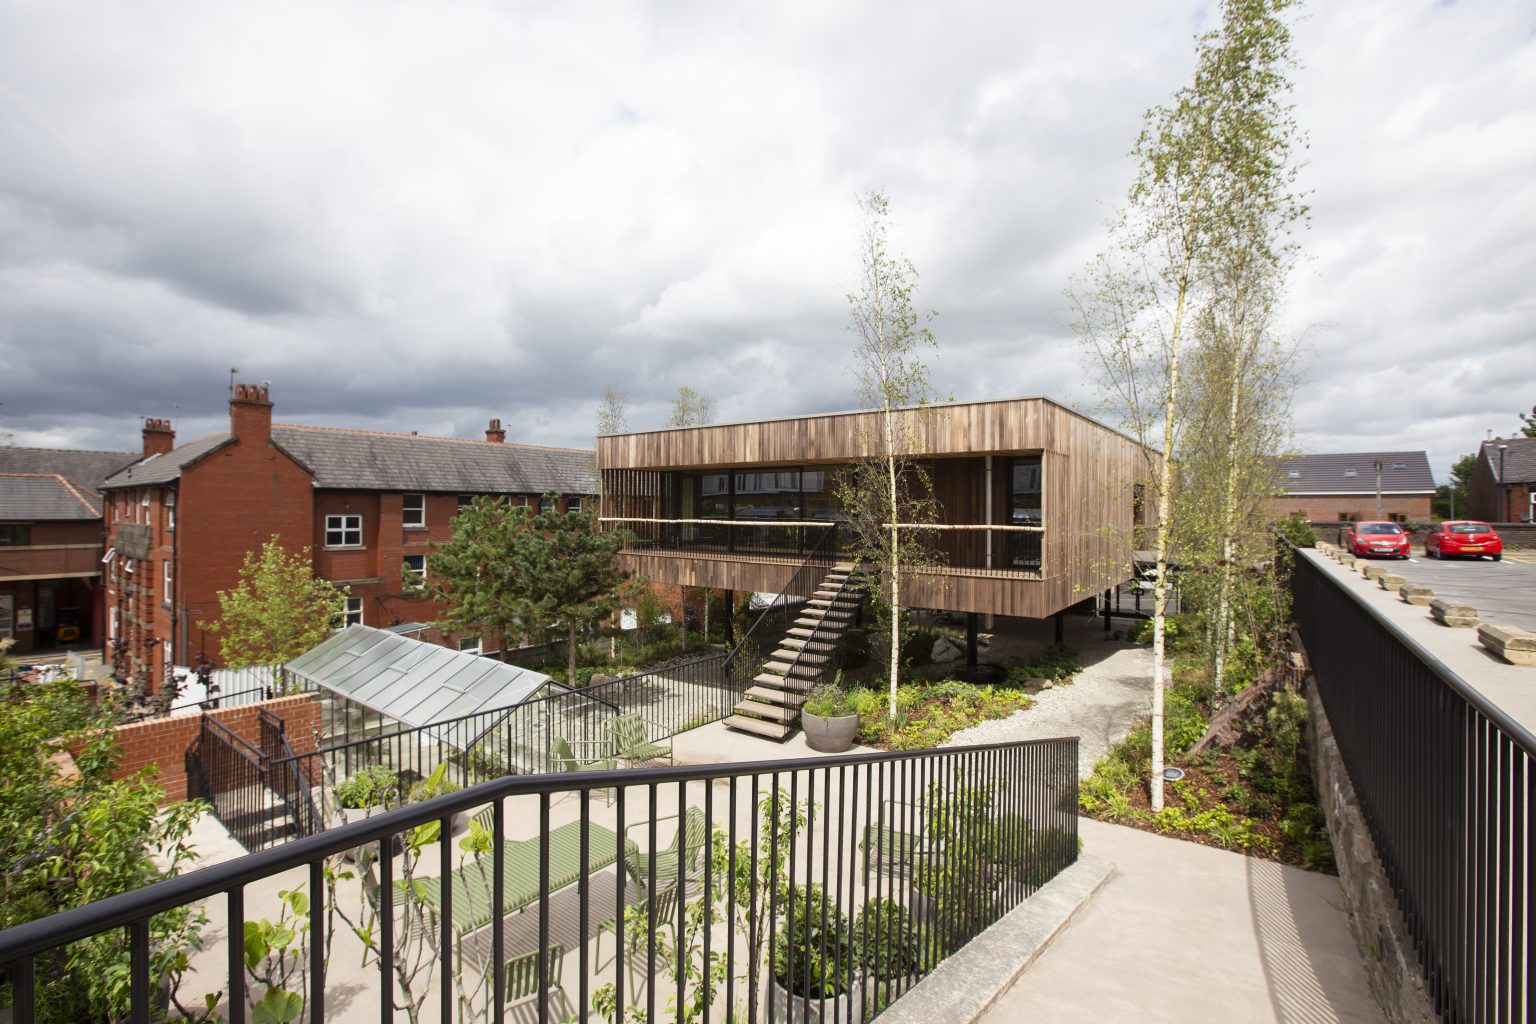 Timber use on the exterior of Maggie's Oldham.